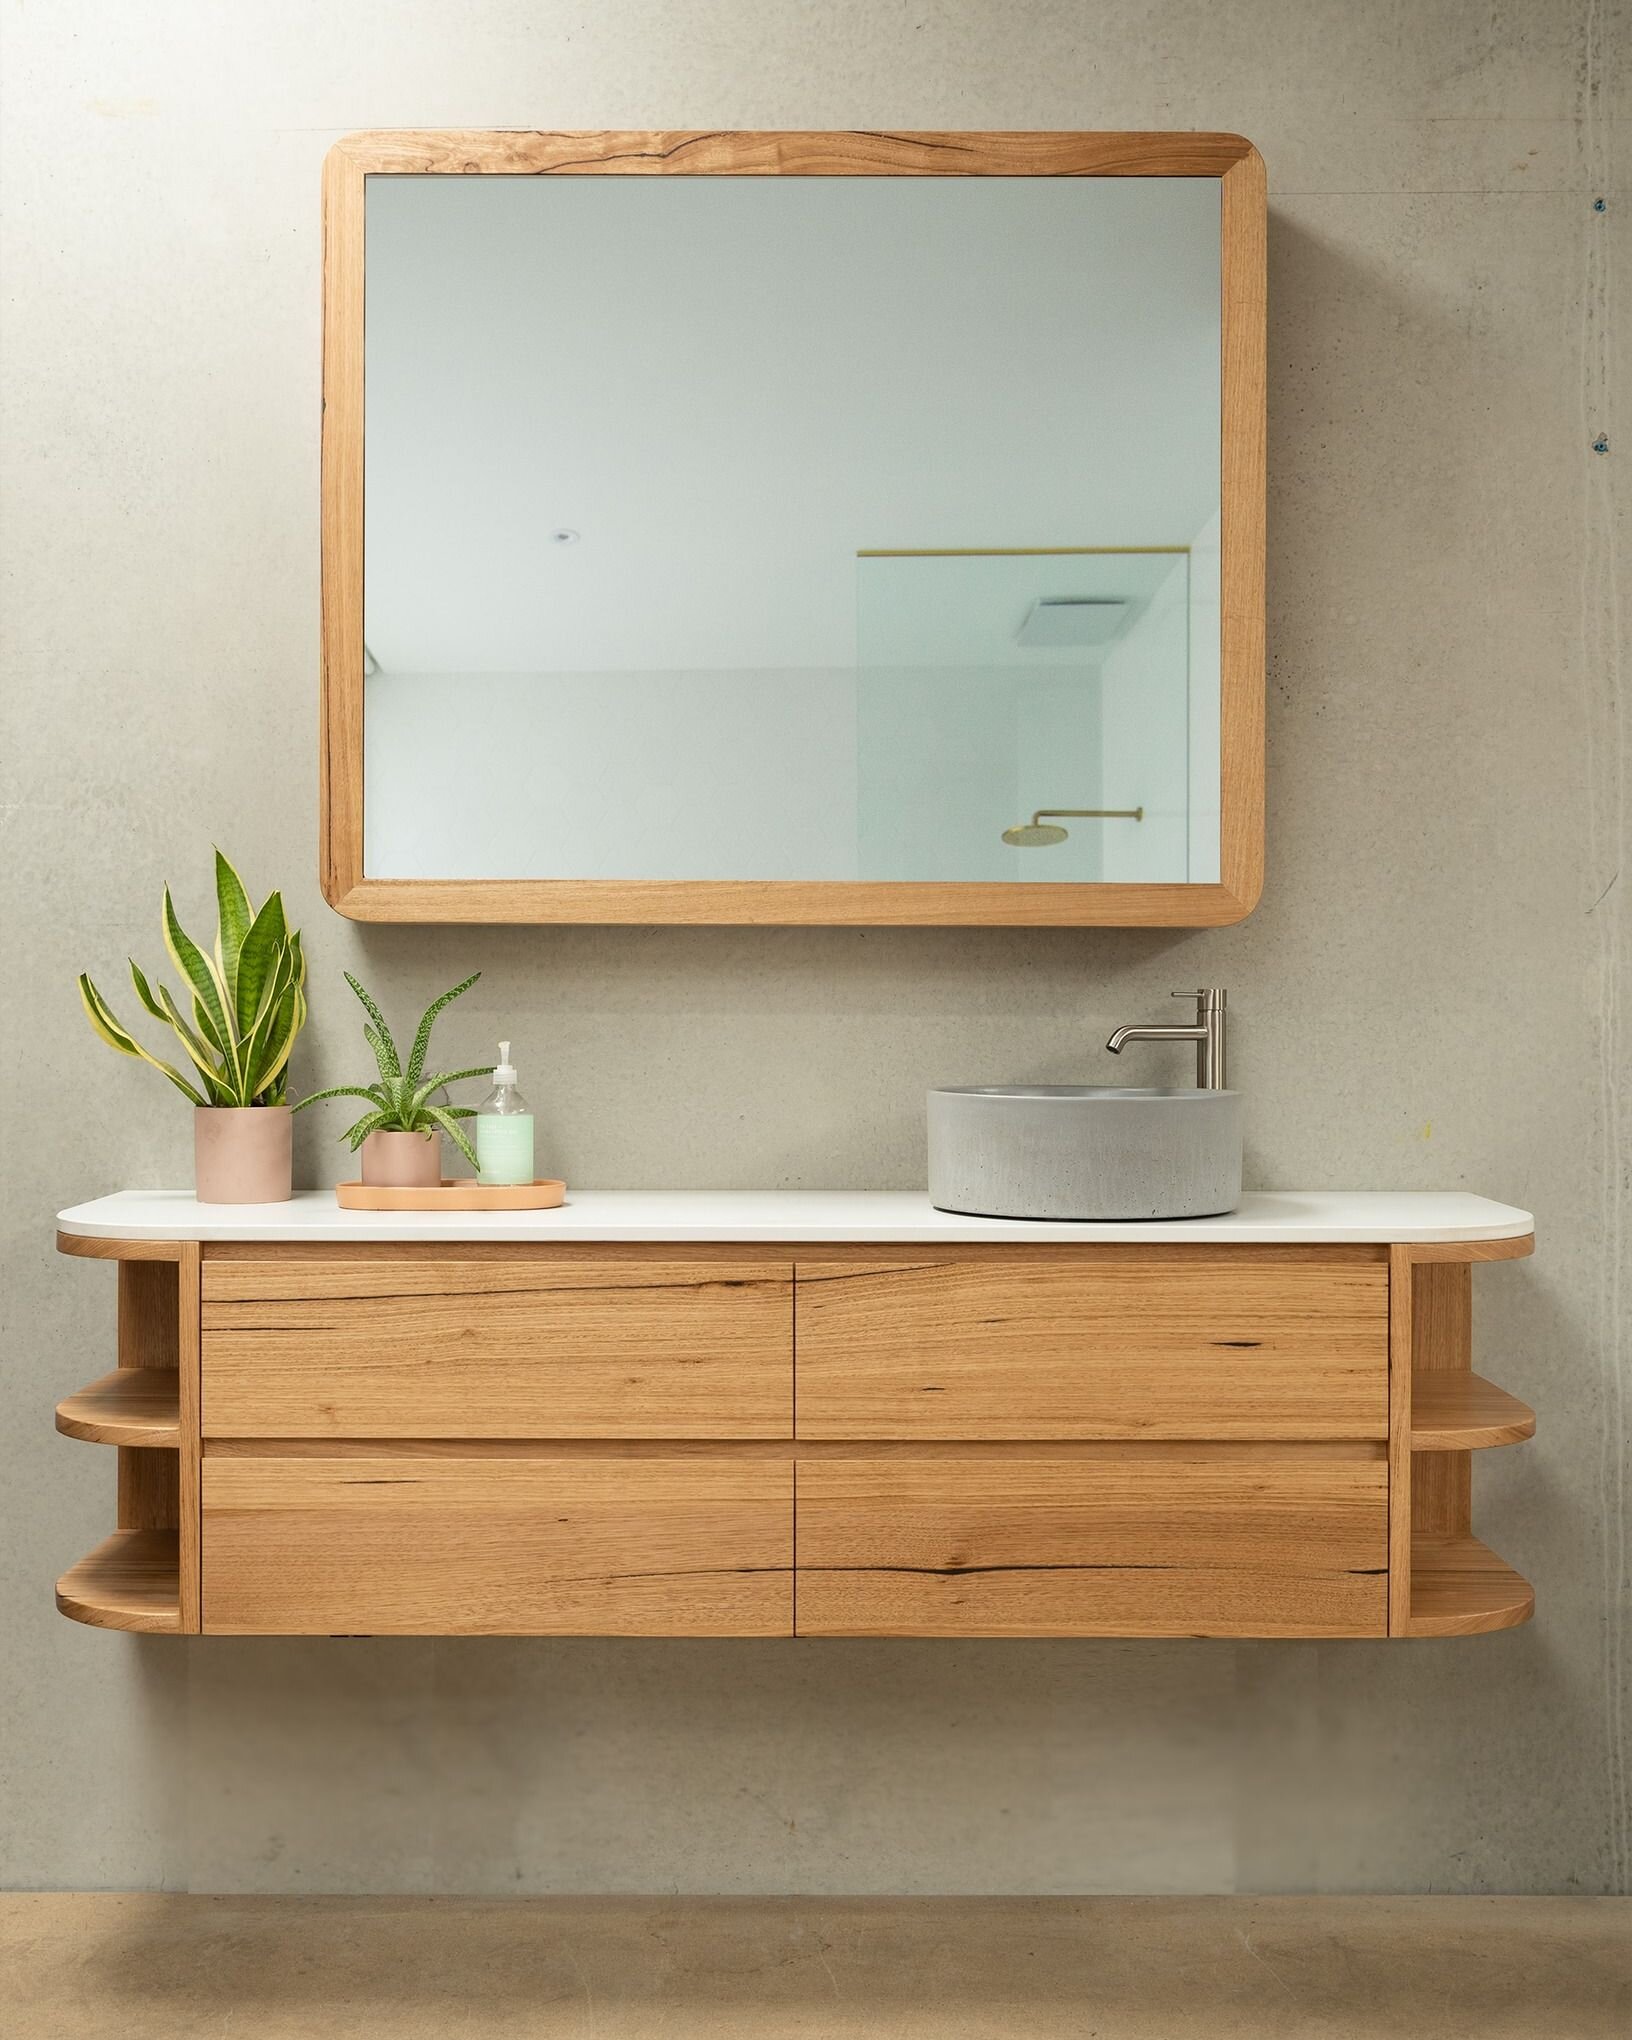 Introducing our new design the BRUNSWICK vanity! This beauty has curves for days and the elegance of a MET gala gown! The Brunswick is dressed to impress with a beautiful @newformconcreting basin handmade in Melbourne!  #australianmade #sustainablede